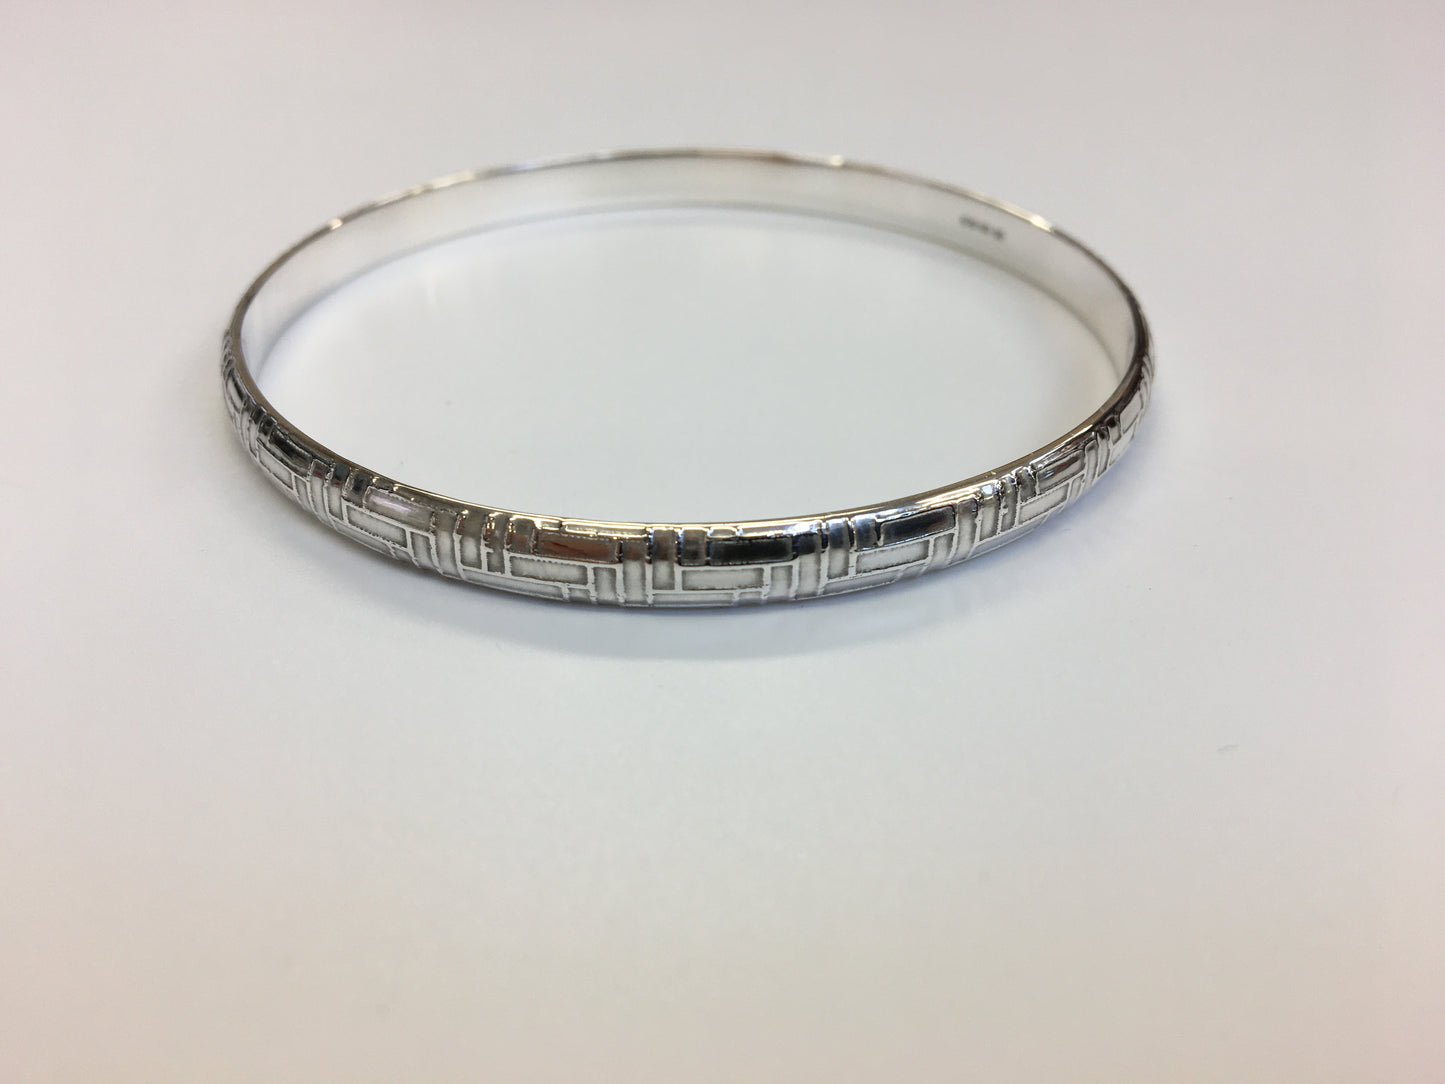 Woven textured D-shaped Sterling Silver Bangle